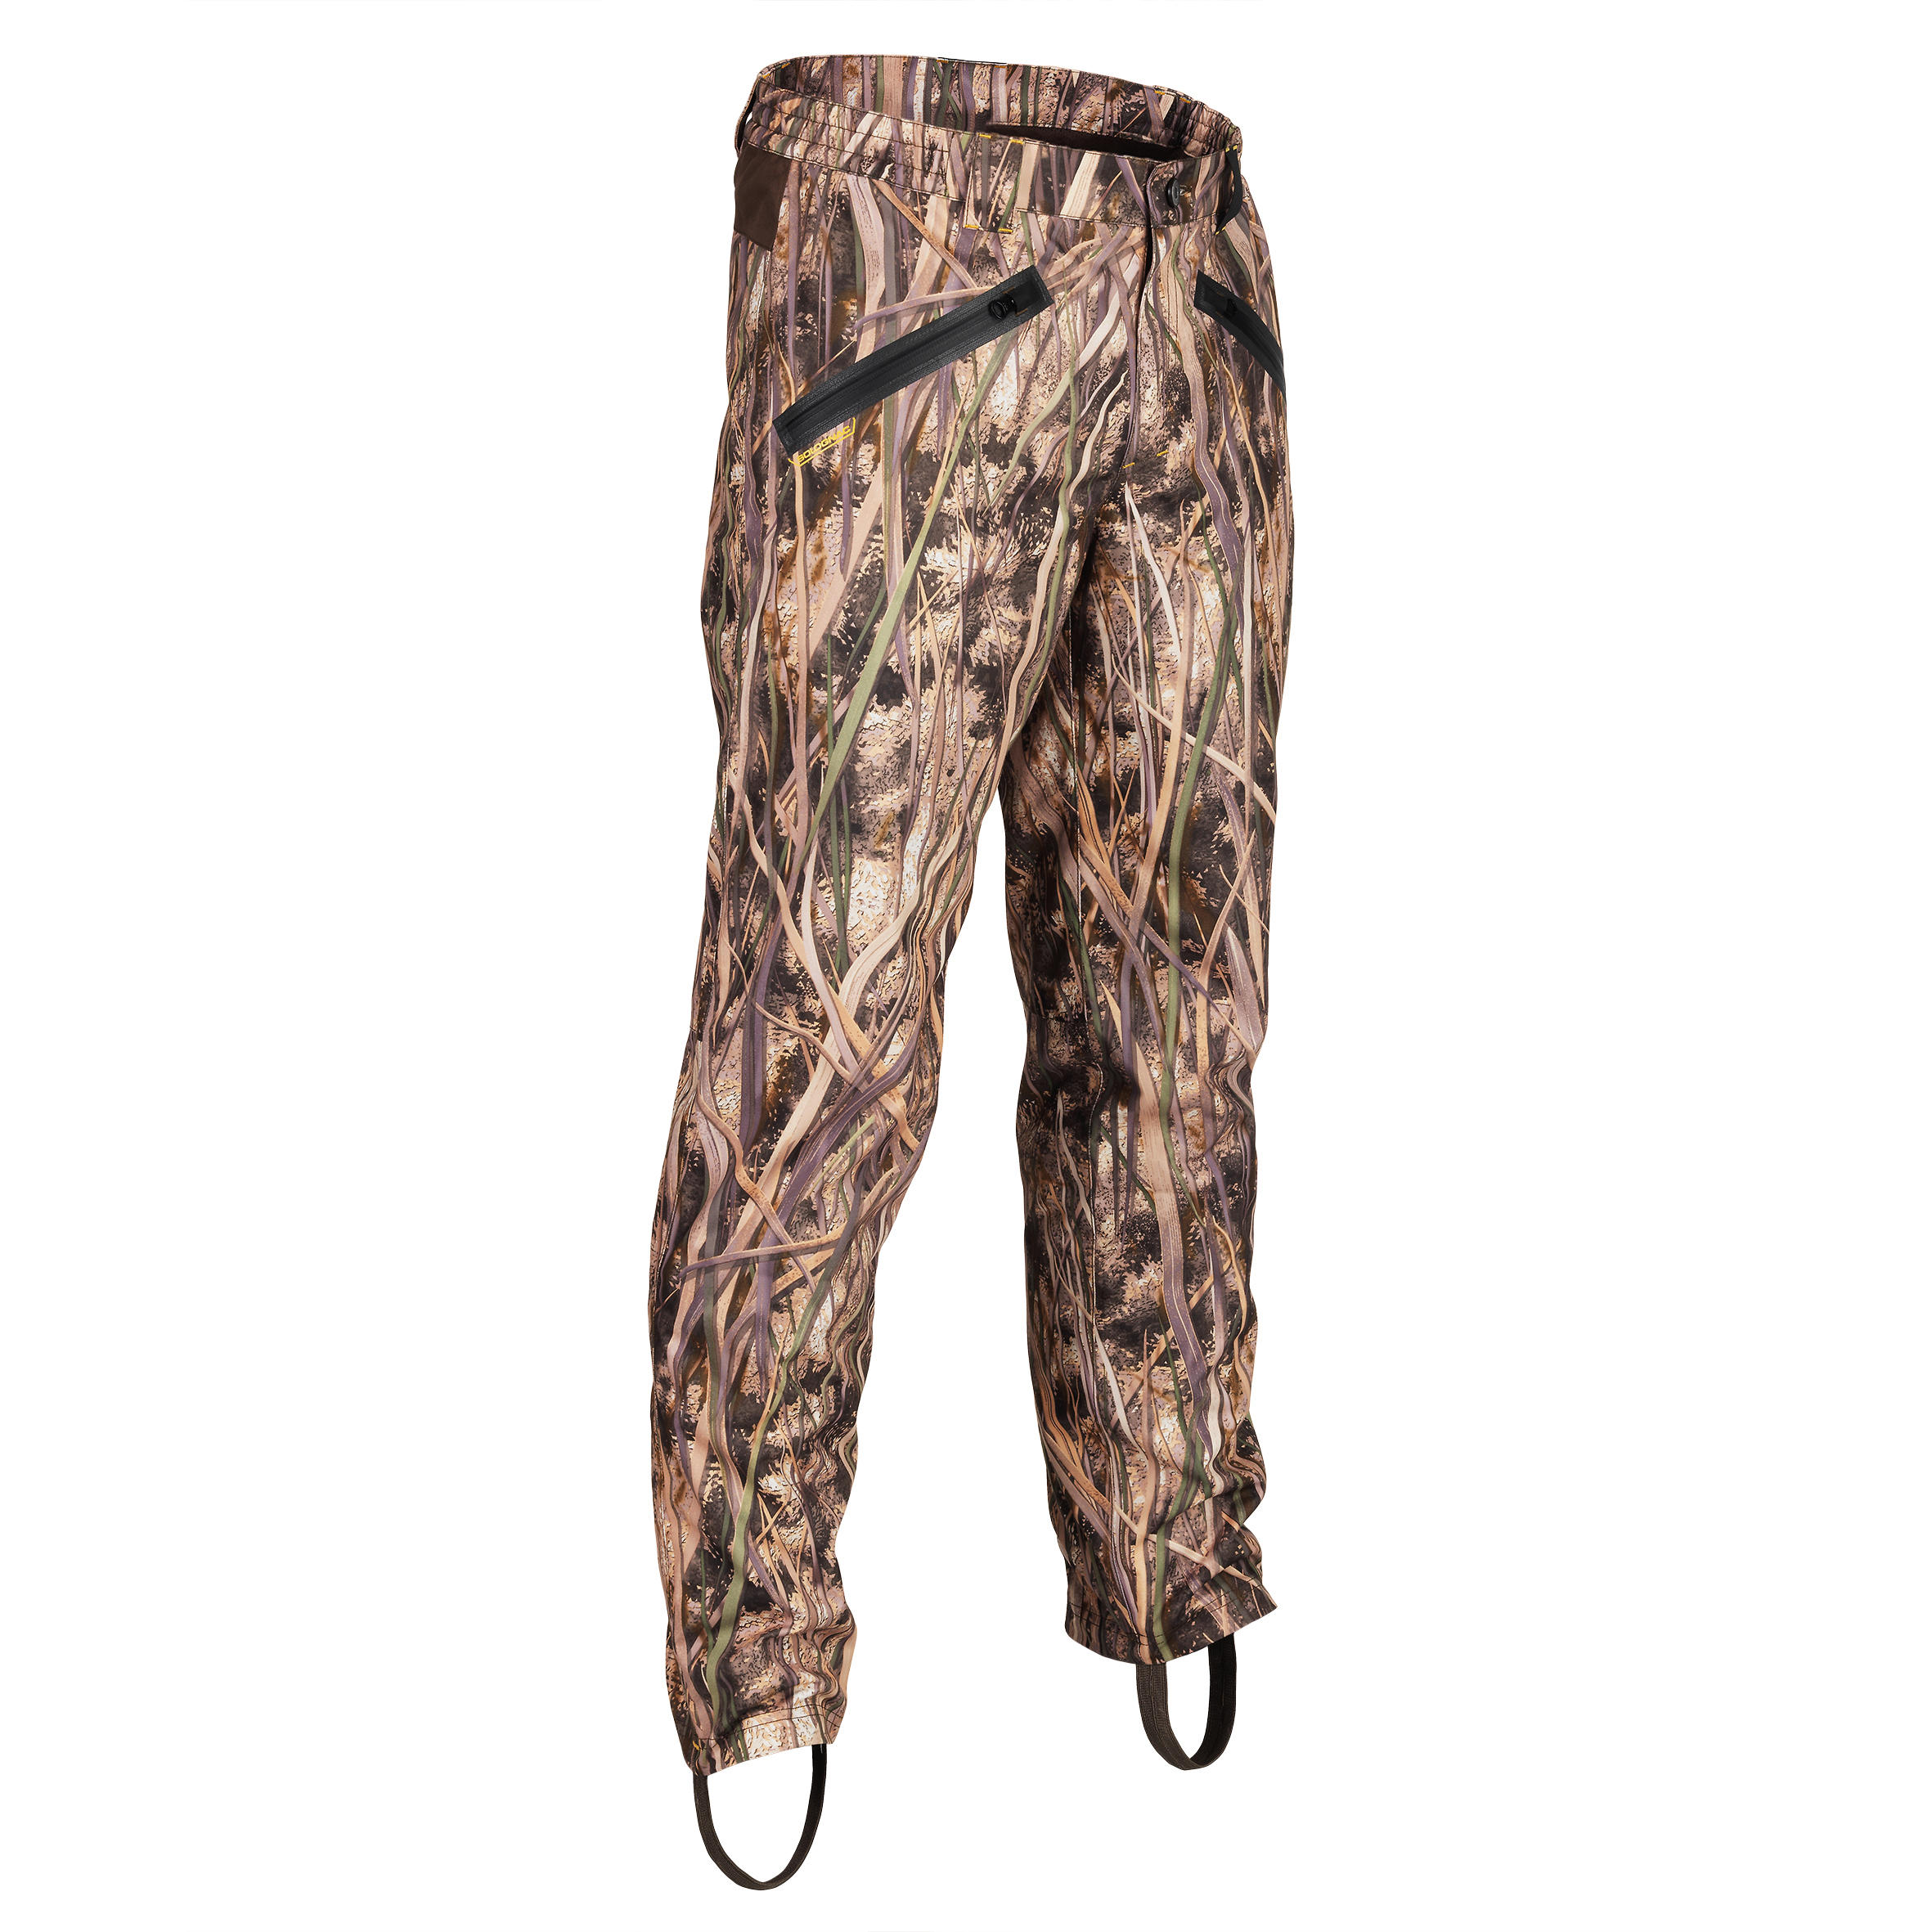 SOLOGNAC 500 waterproof hunting trousers with wetlands camo